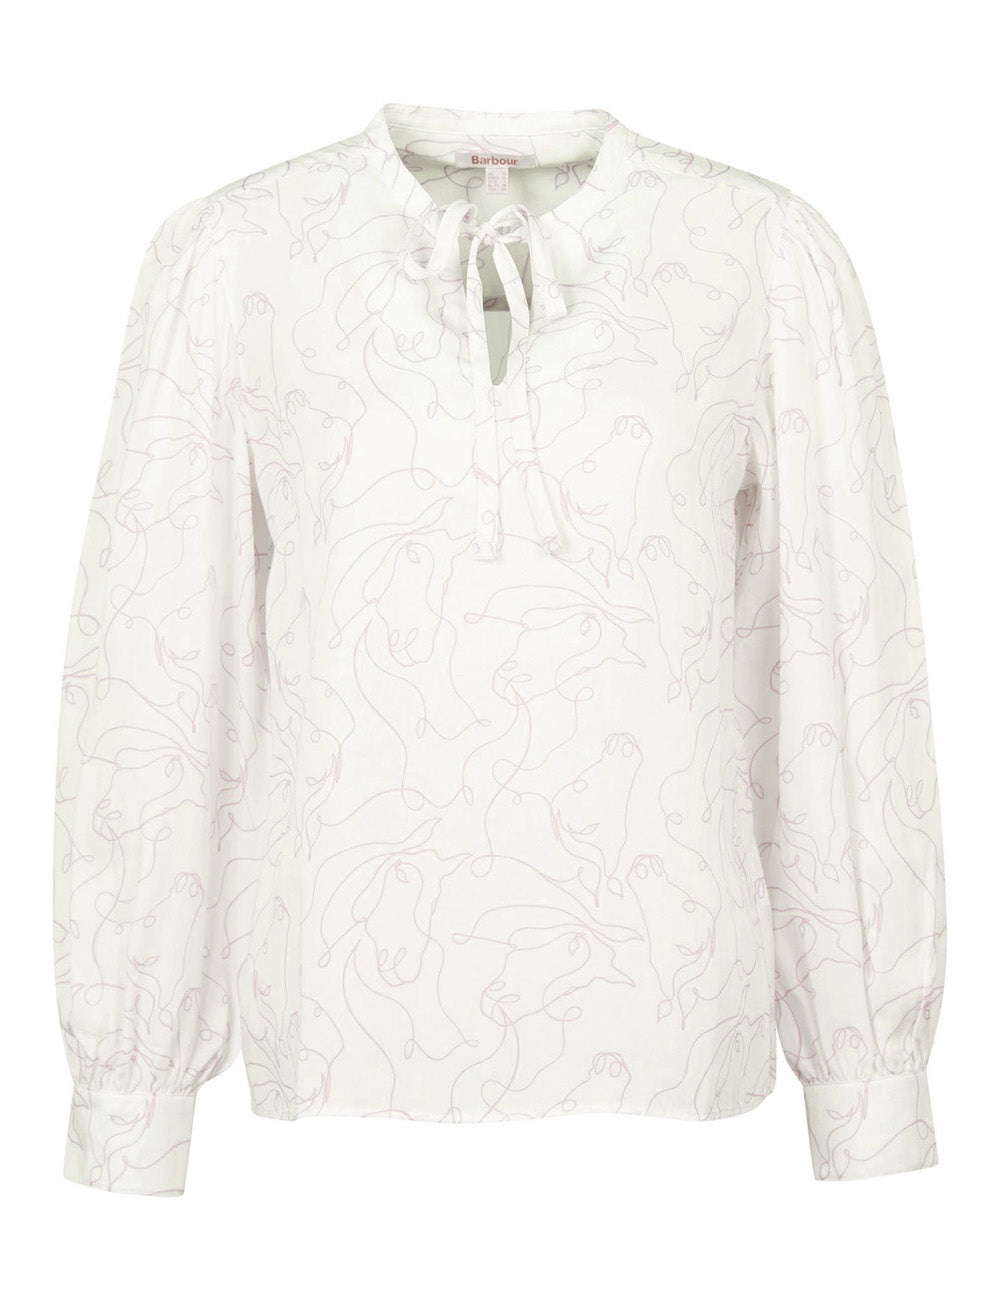 Barbour's Regia Top on a white background